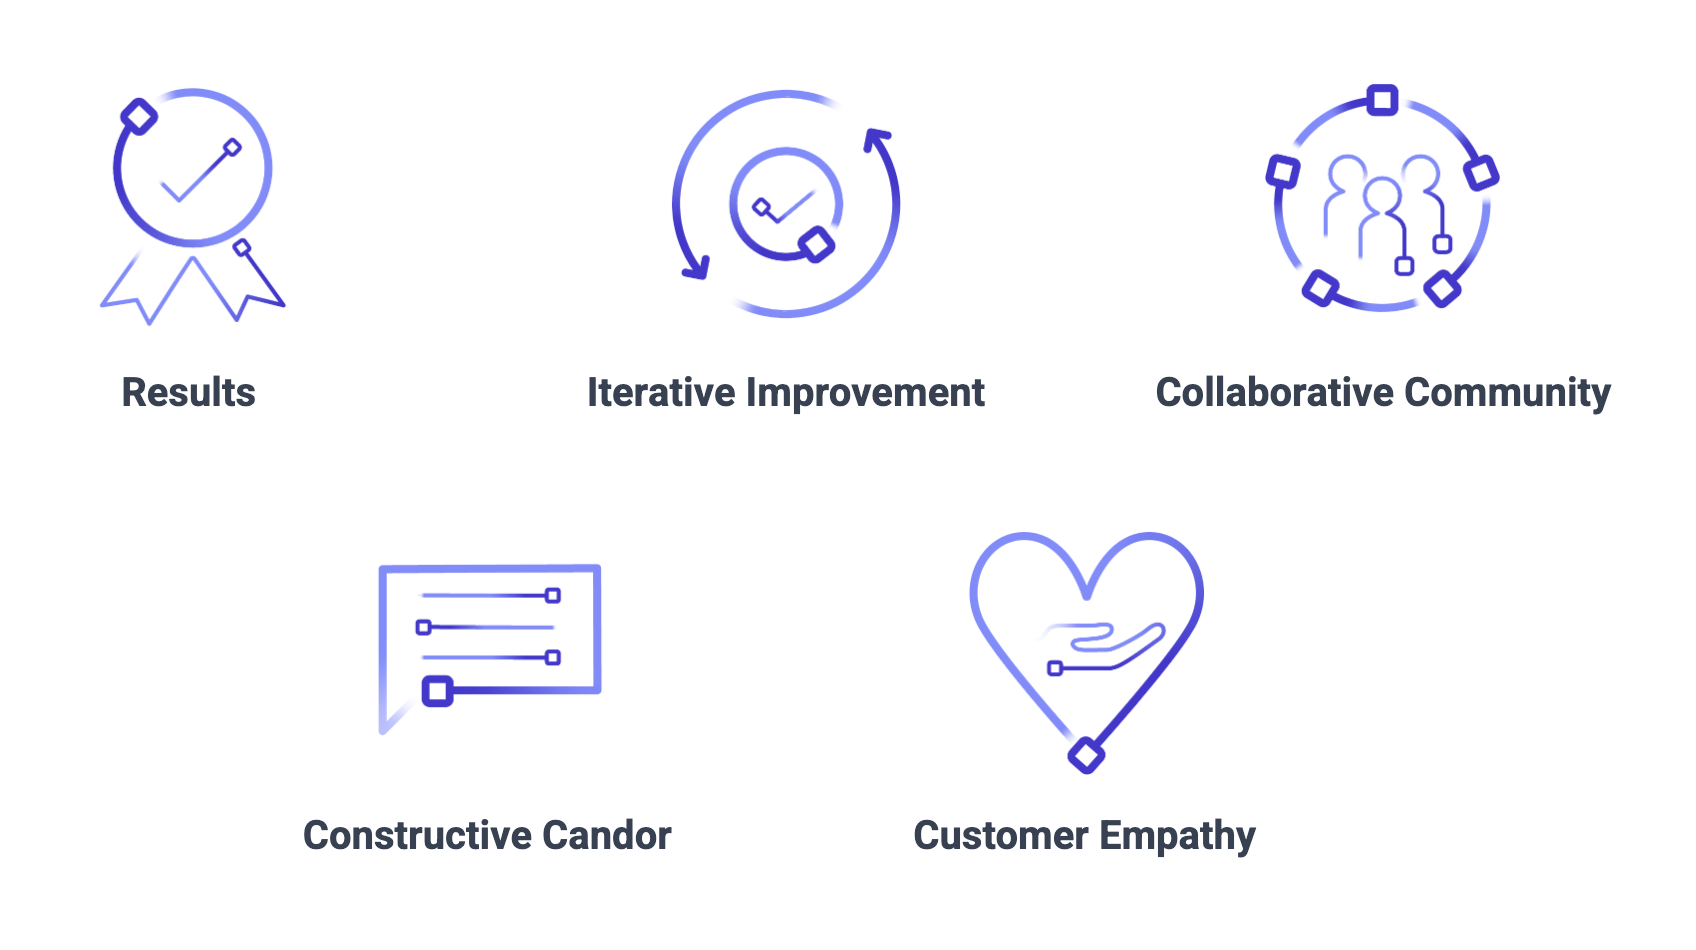 An example showing how Pictograms are used in the 'Company Values' section of the FlowFuse website